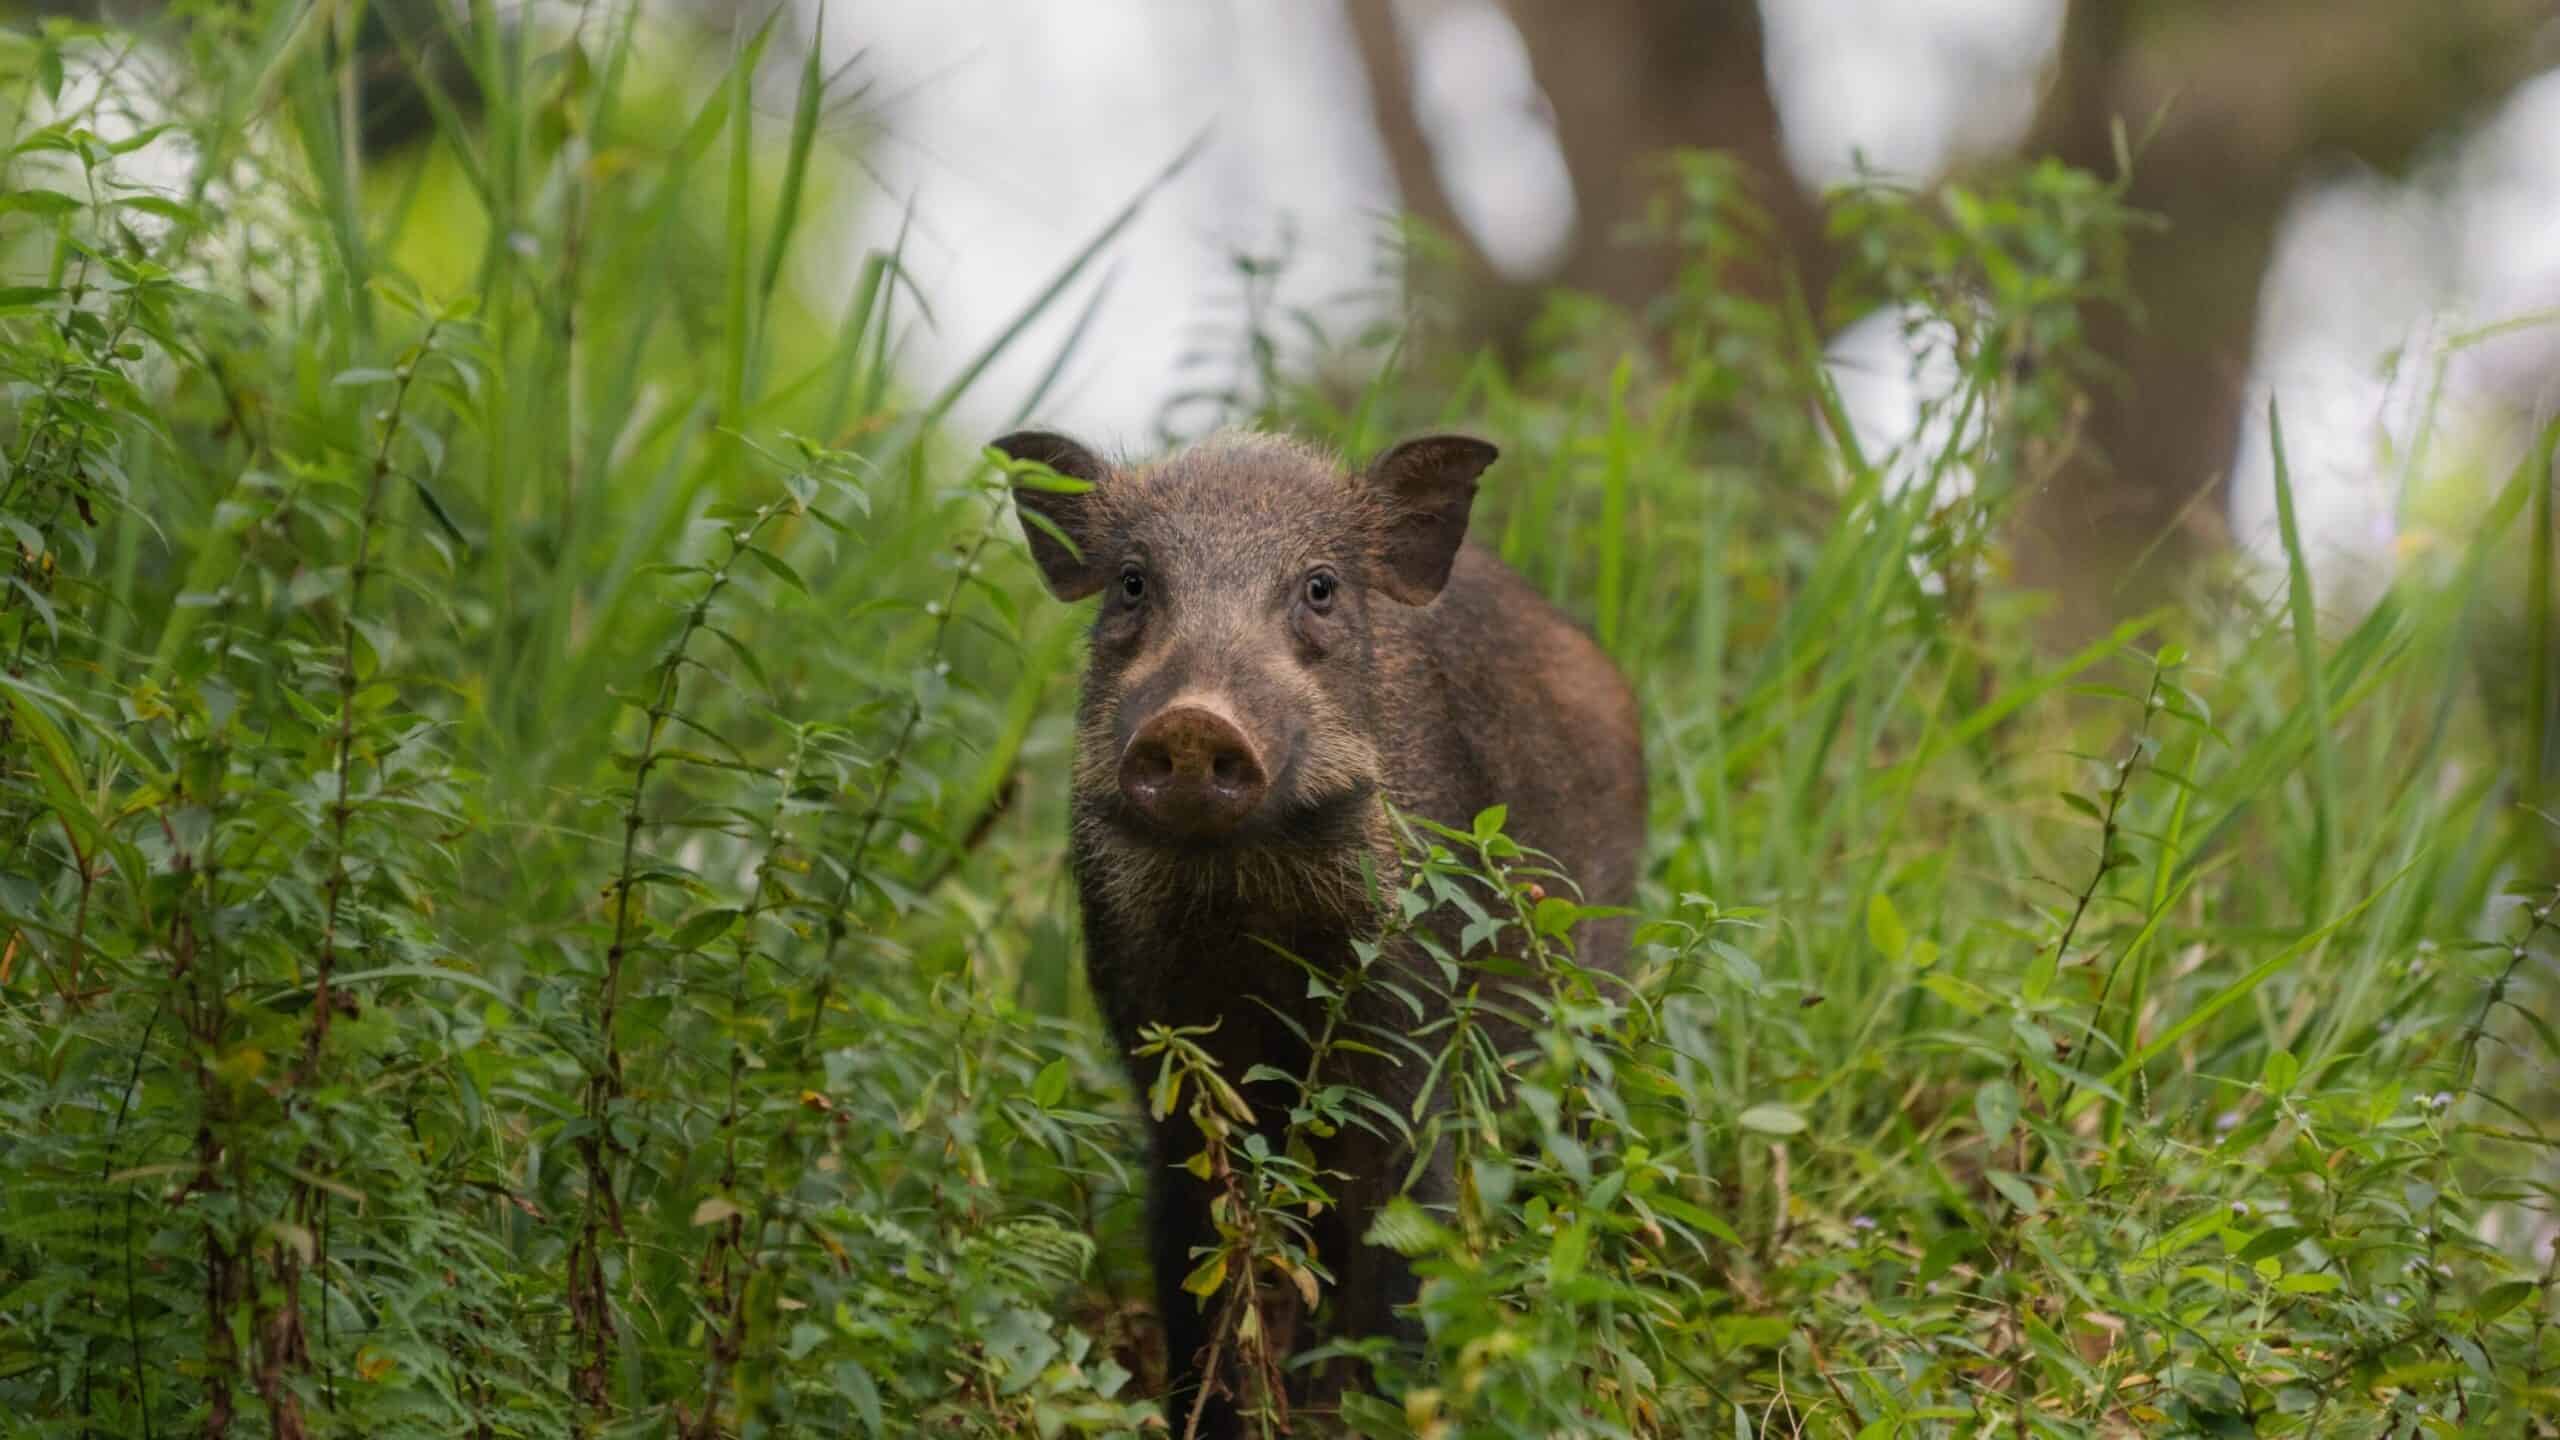 The wild boar comes out of its hiding places to look for food